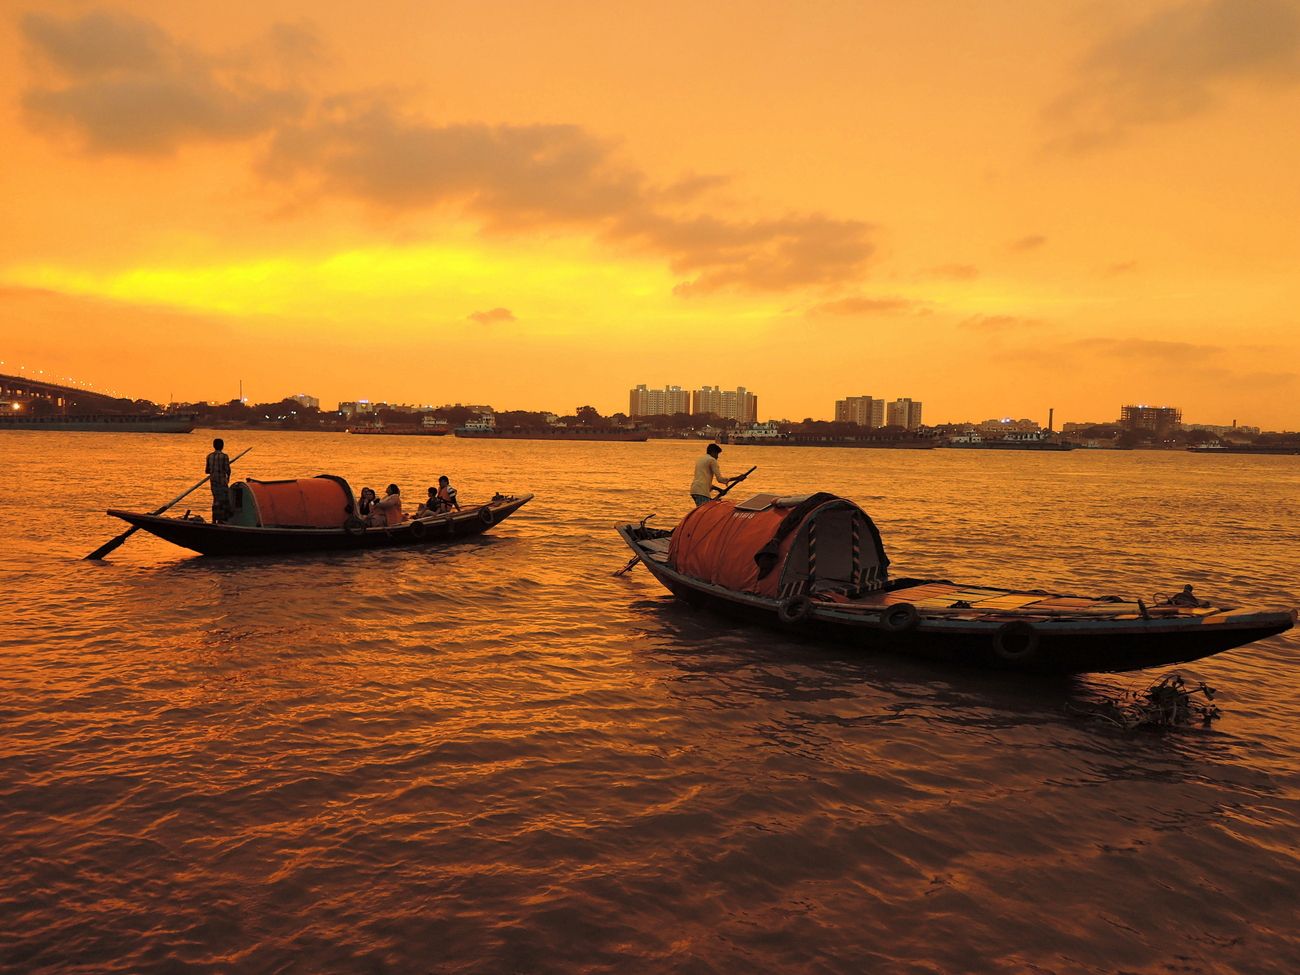 Relieve the Kolkata Charm as you soak in the splendor of the setting sun while drifting on the Hooghly river 